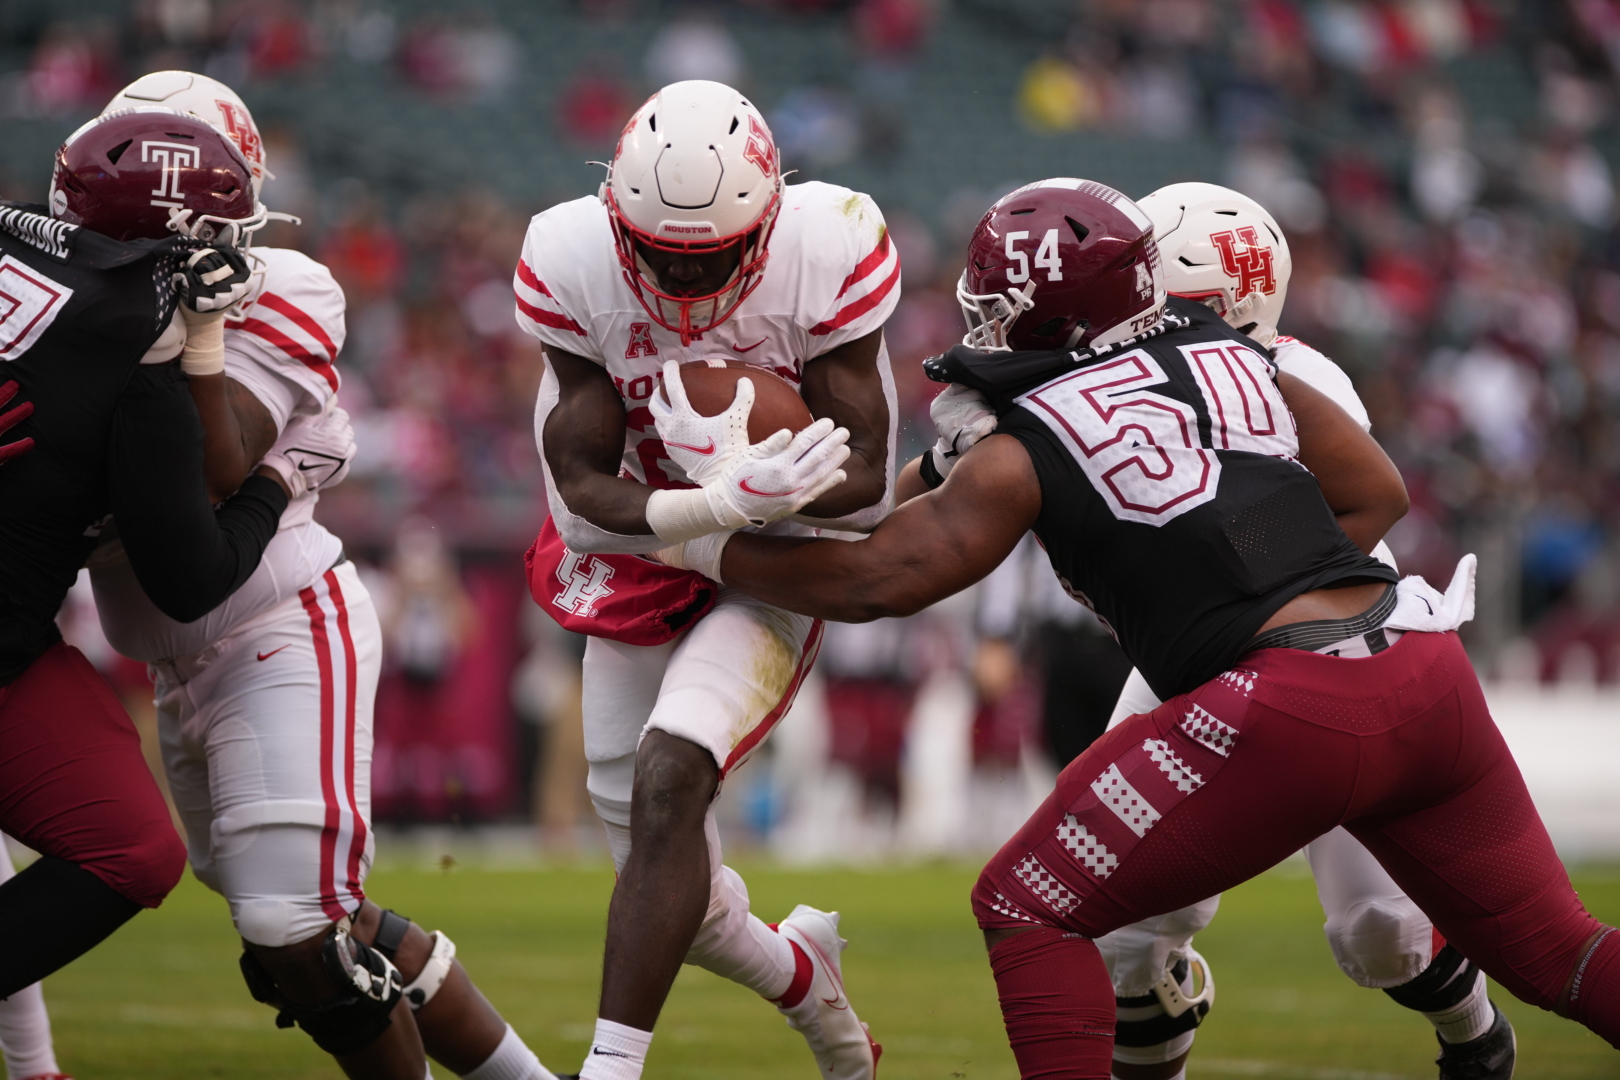 Freshman running back Alton McCaskill scored his 13th and 14th touchdowns of the season against Temple, breaking the UH football program record for most touchdowns by a true freshman in a single-season. | Courtesy of UH athletics